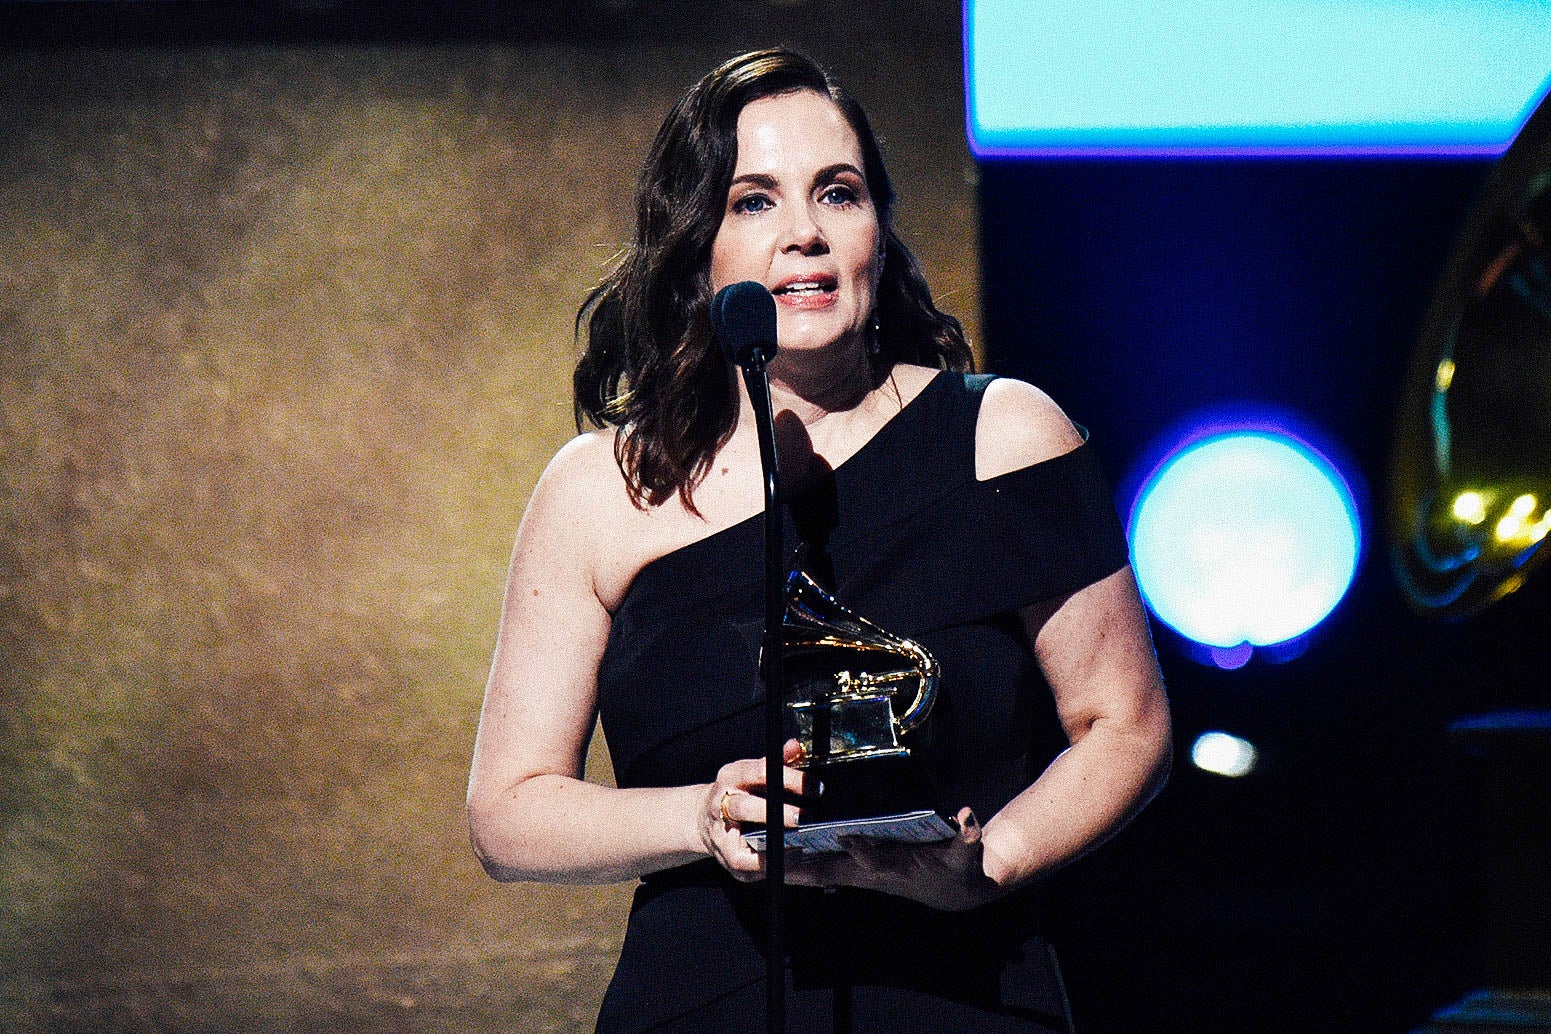 Singer-songwriter Lori McKenna accepts the award for Best Country Song onstage at the 59th Grammy Awards.